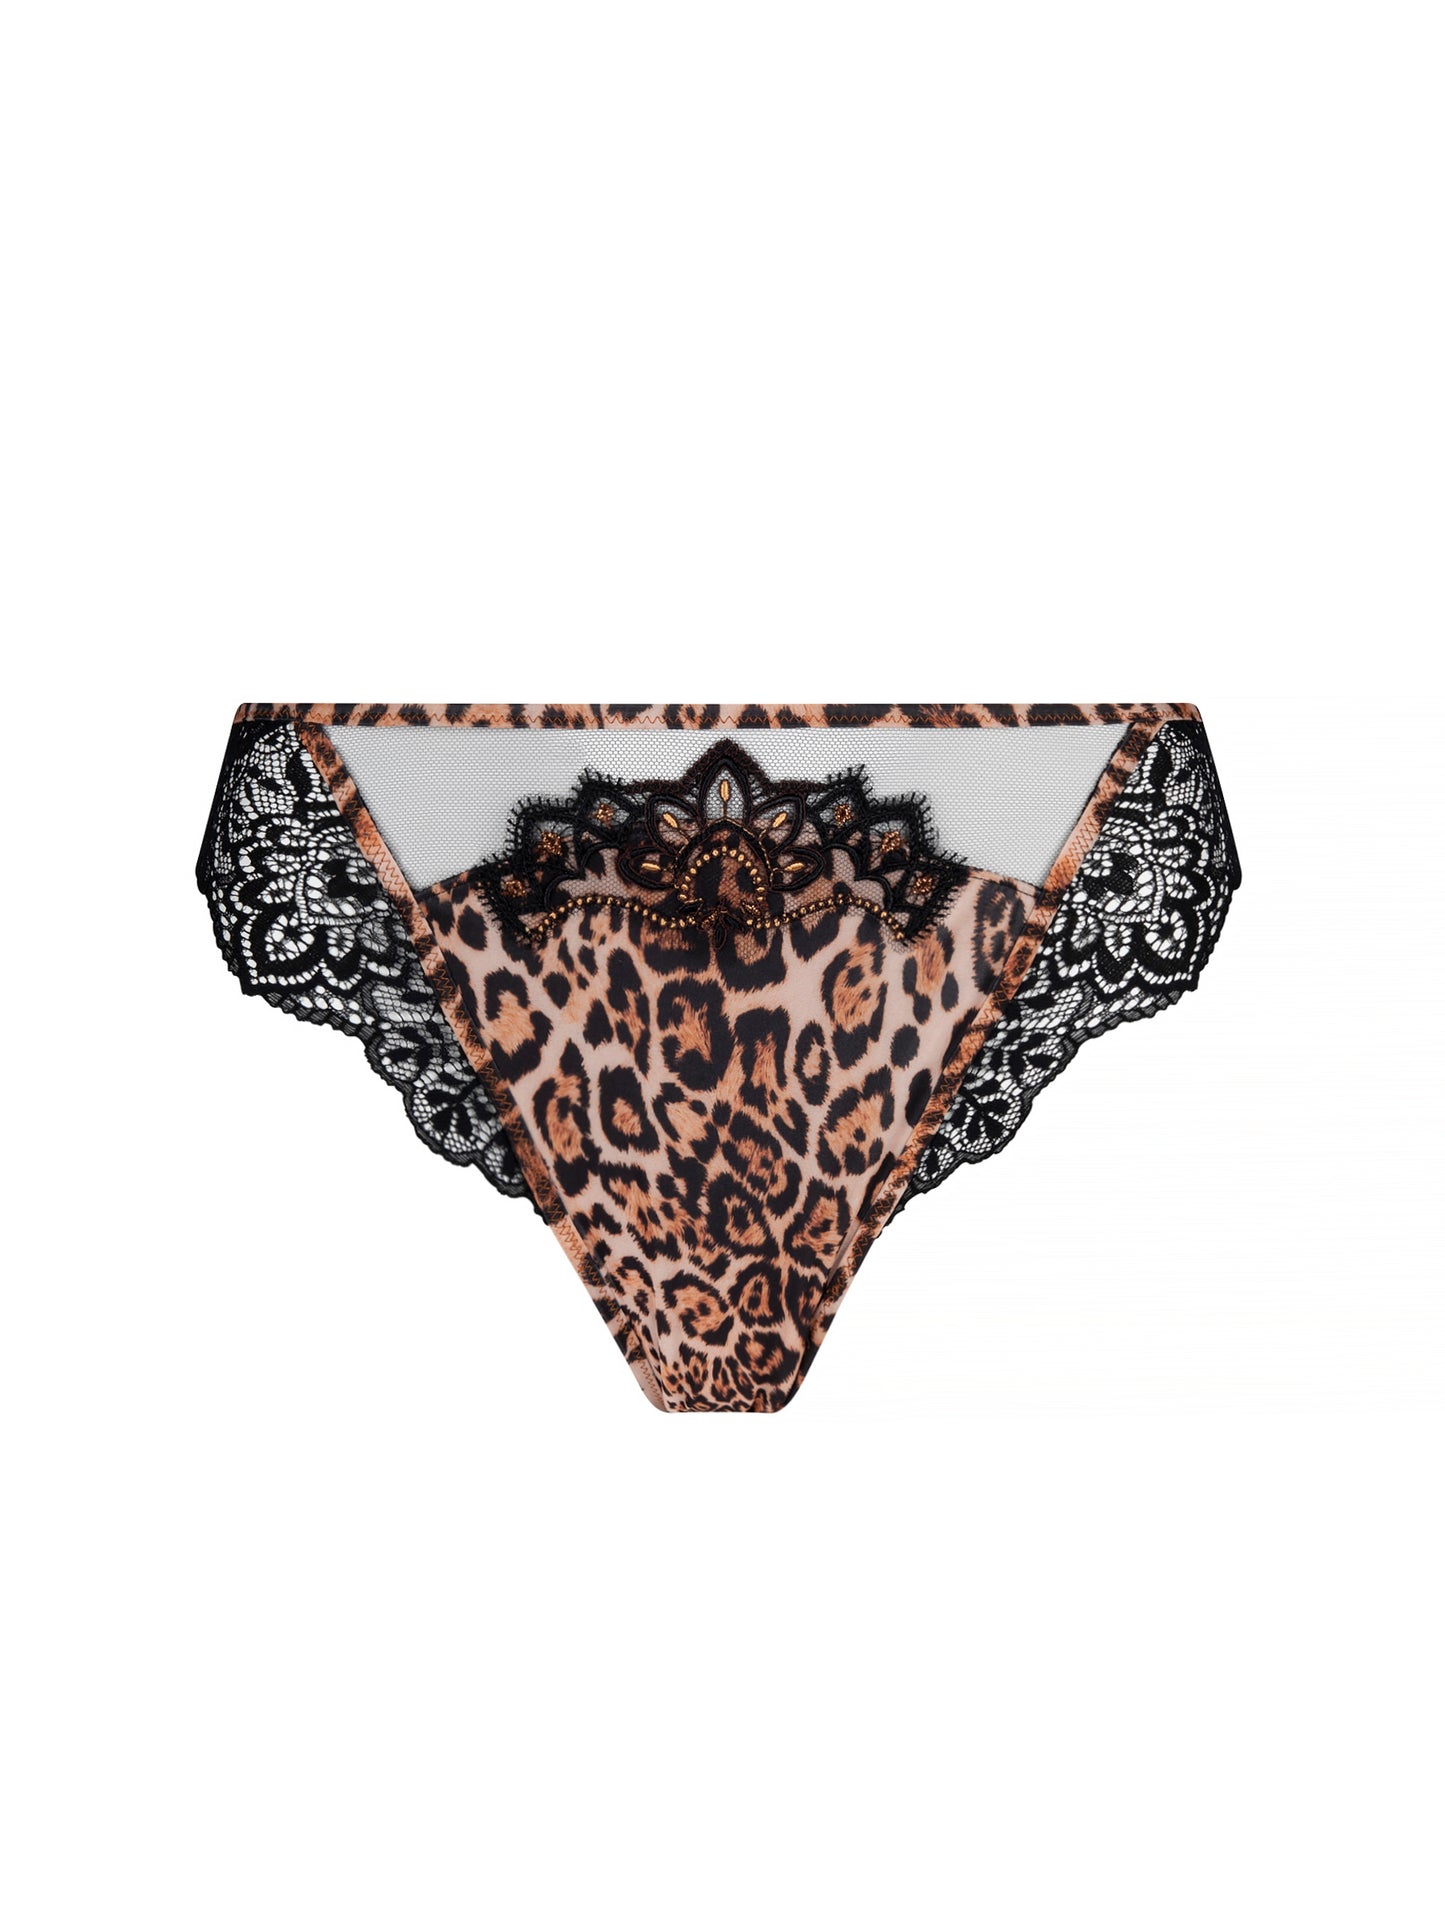 Fauve Amour in Amber Panthere Italian Bikini Brief By Lise Charmel - XS-XXL